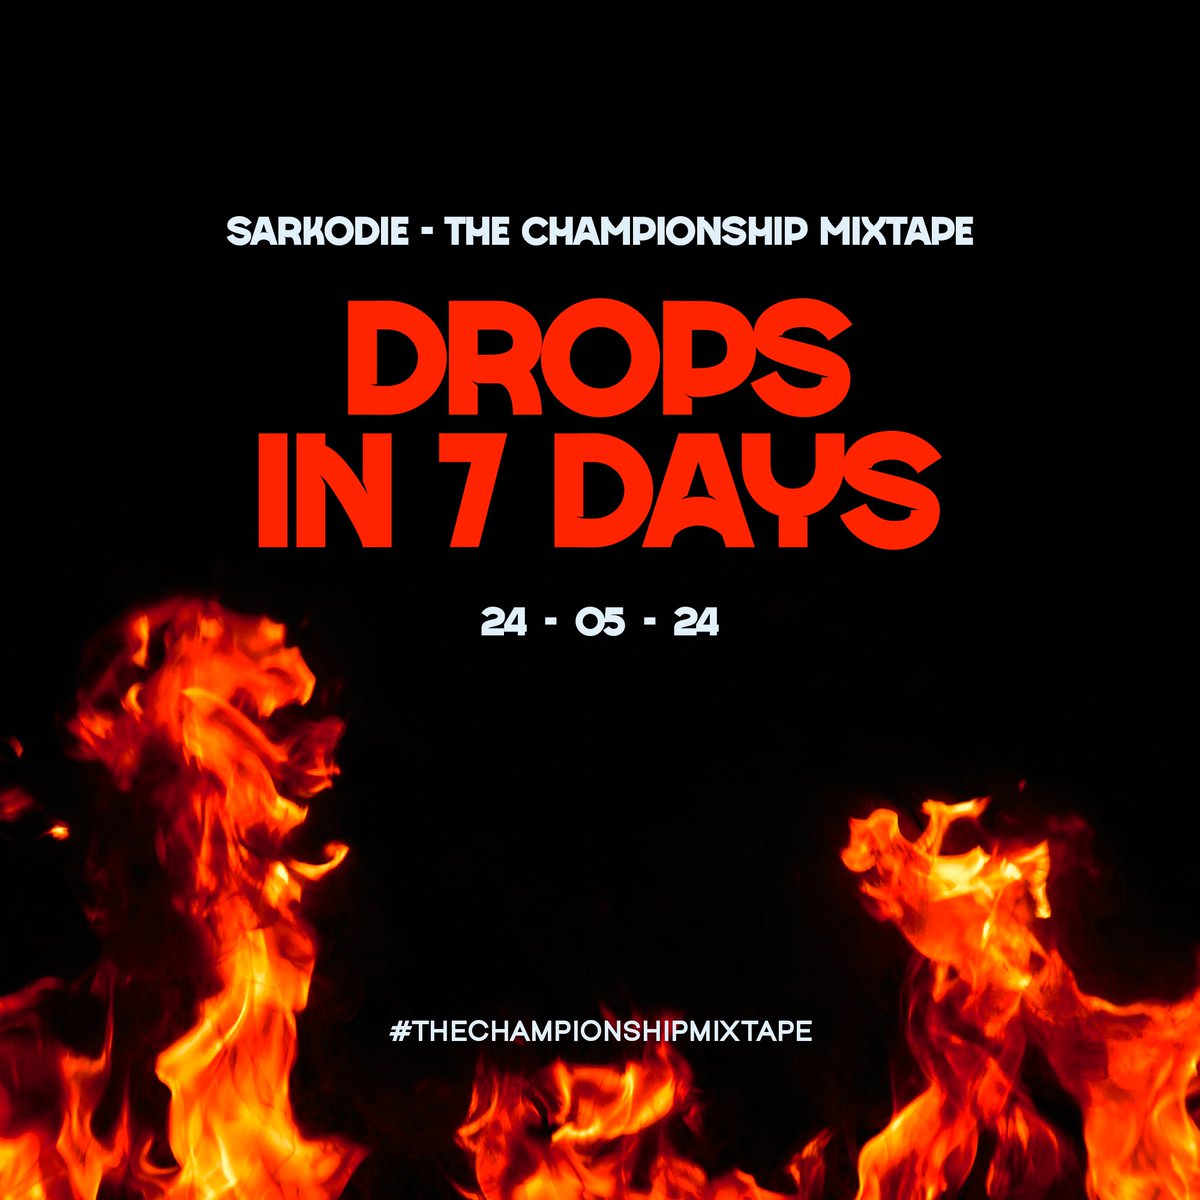 Sarkodie || #TheChampionshipMixtape release countdown is on !